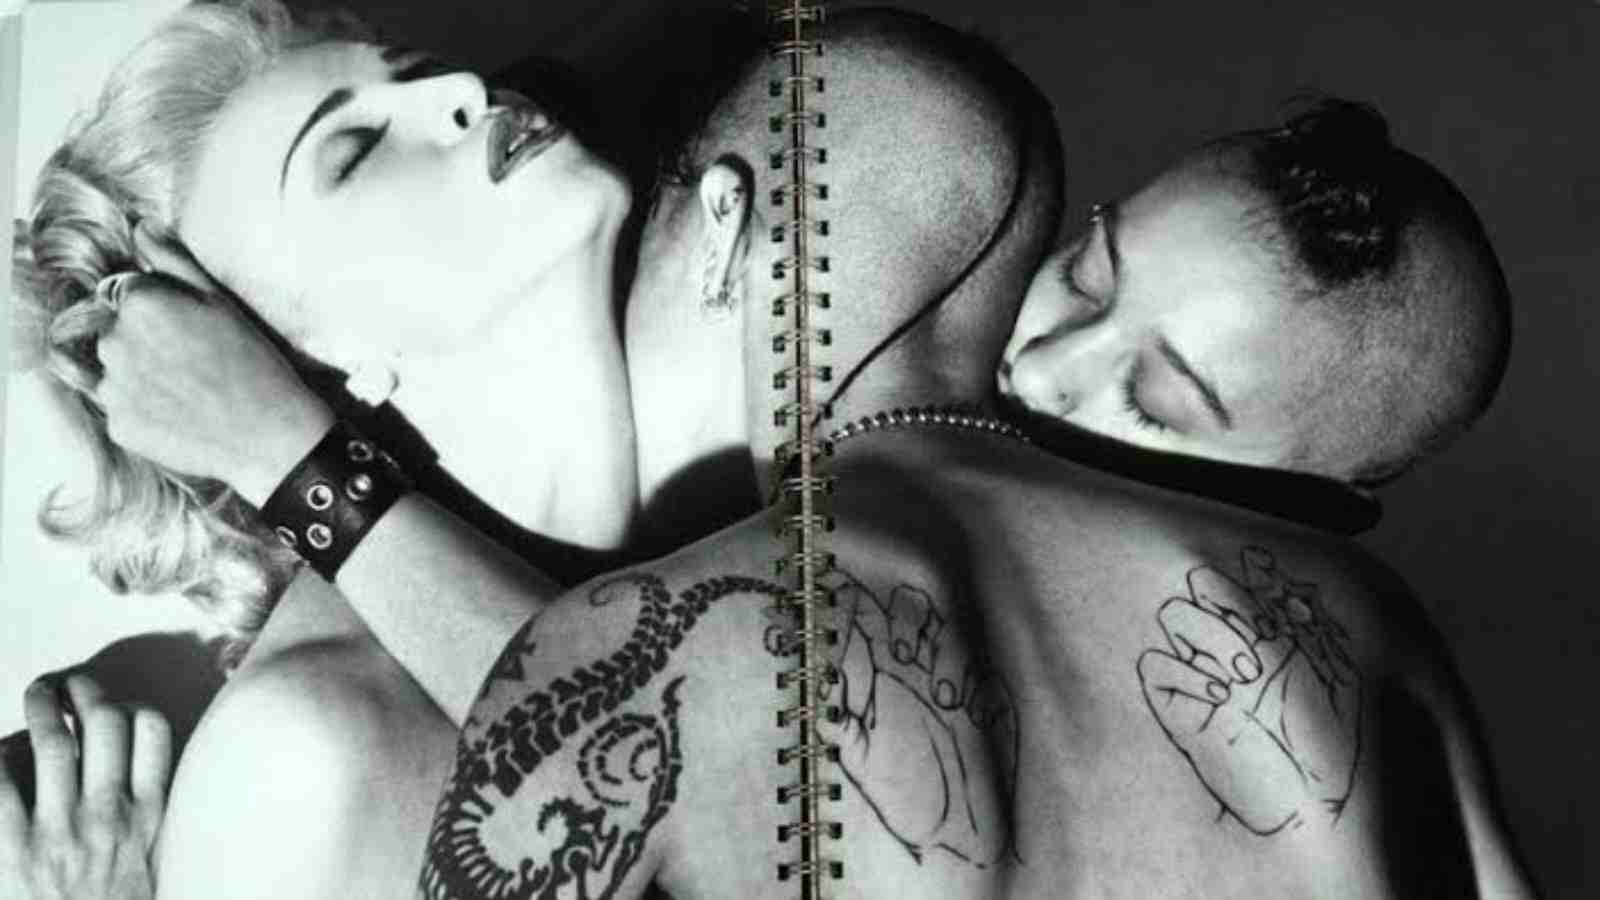 The coffee-table book of Madonna, 'Sex'